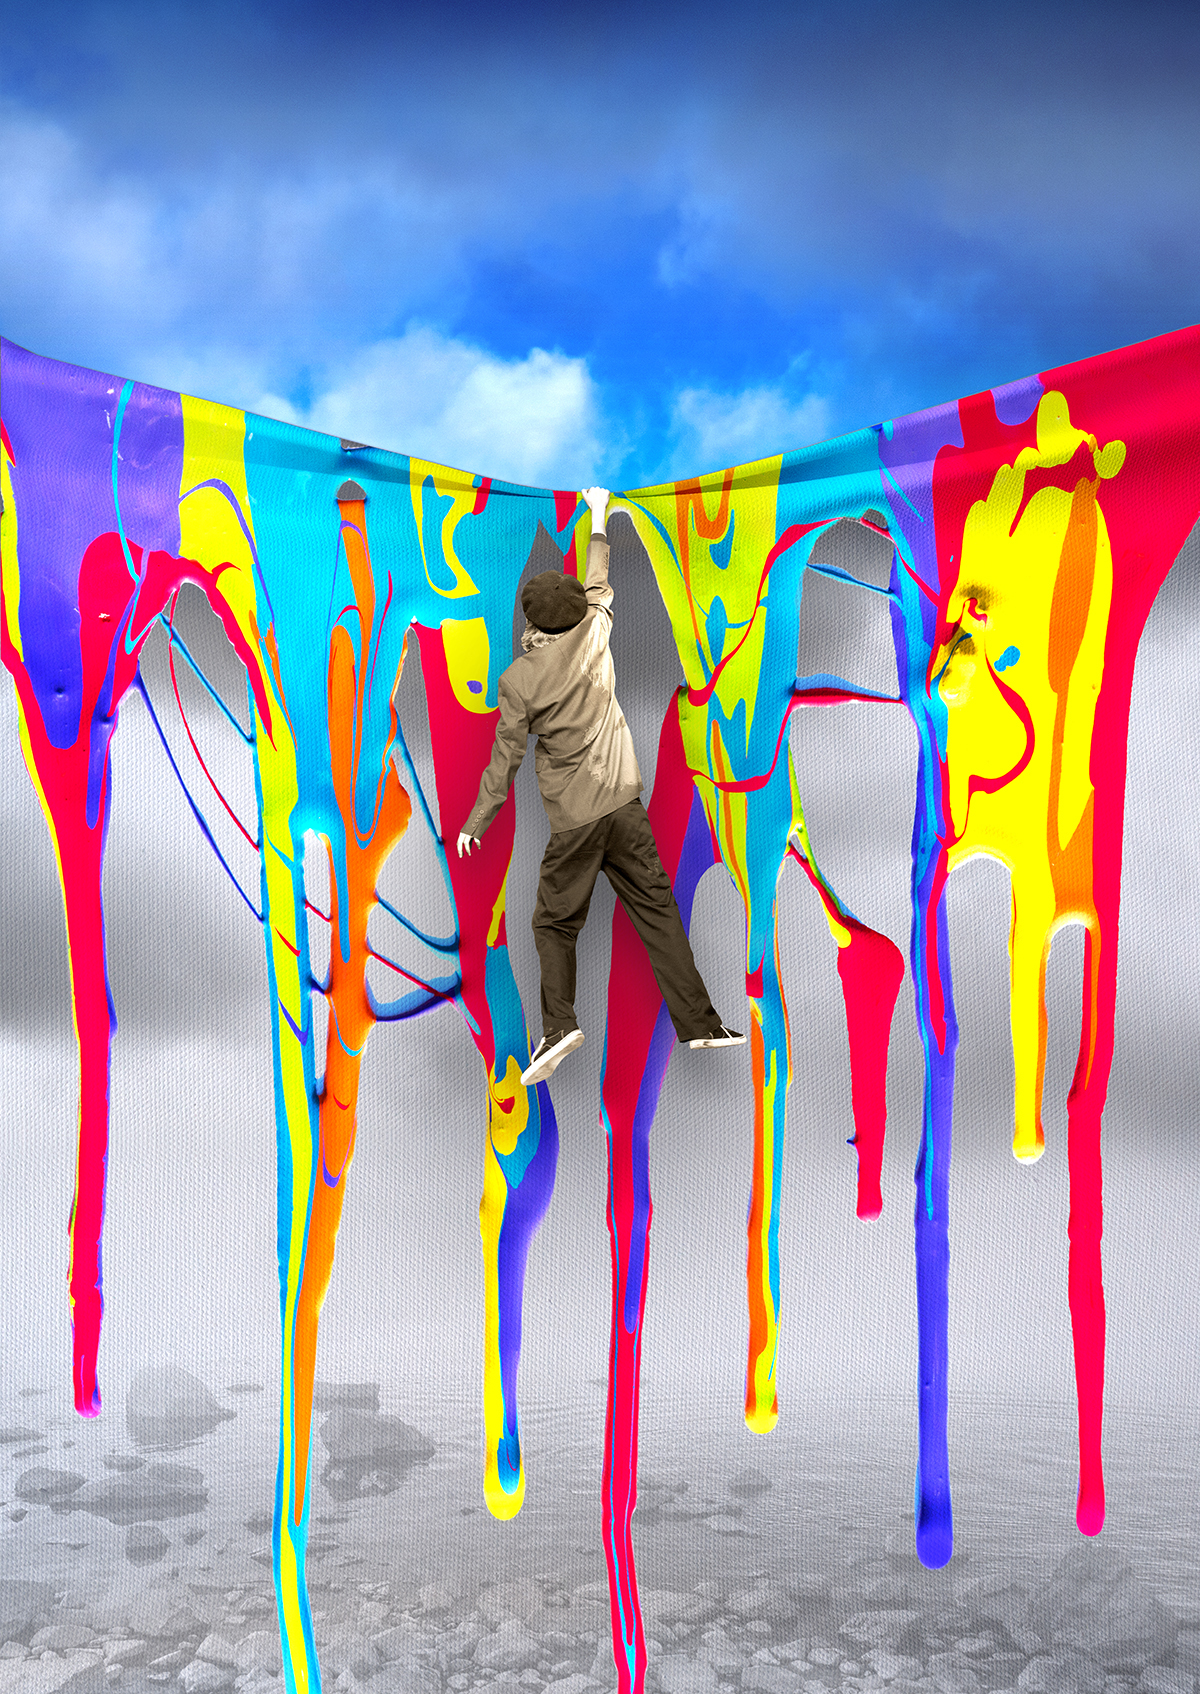 poster surrealism photoshop canvas paint dripping SKY clouds person human Photo Manipulation  surreal Artbox Christchurch New Zealand